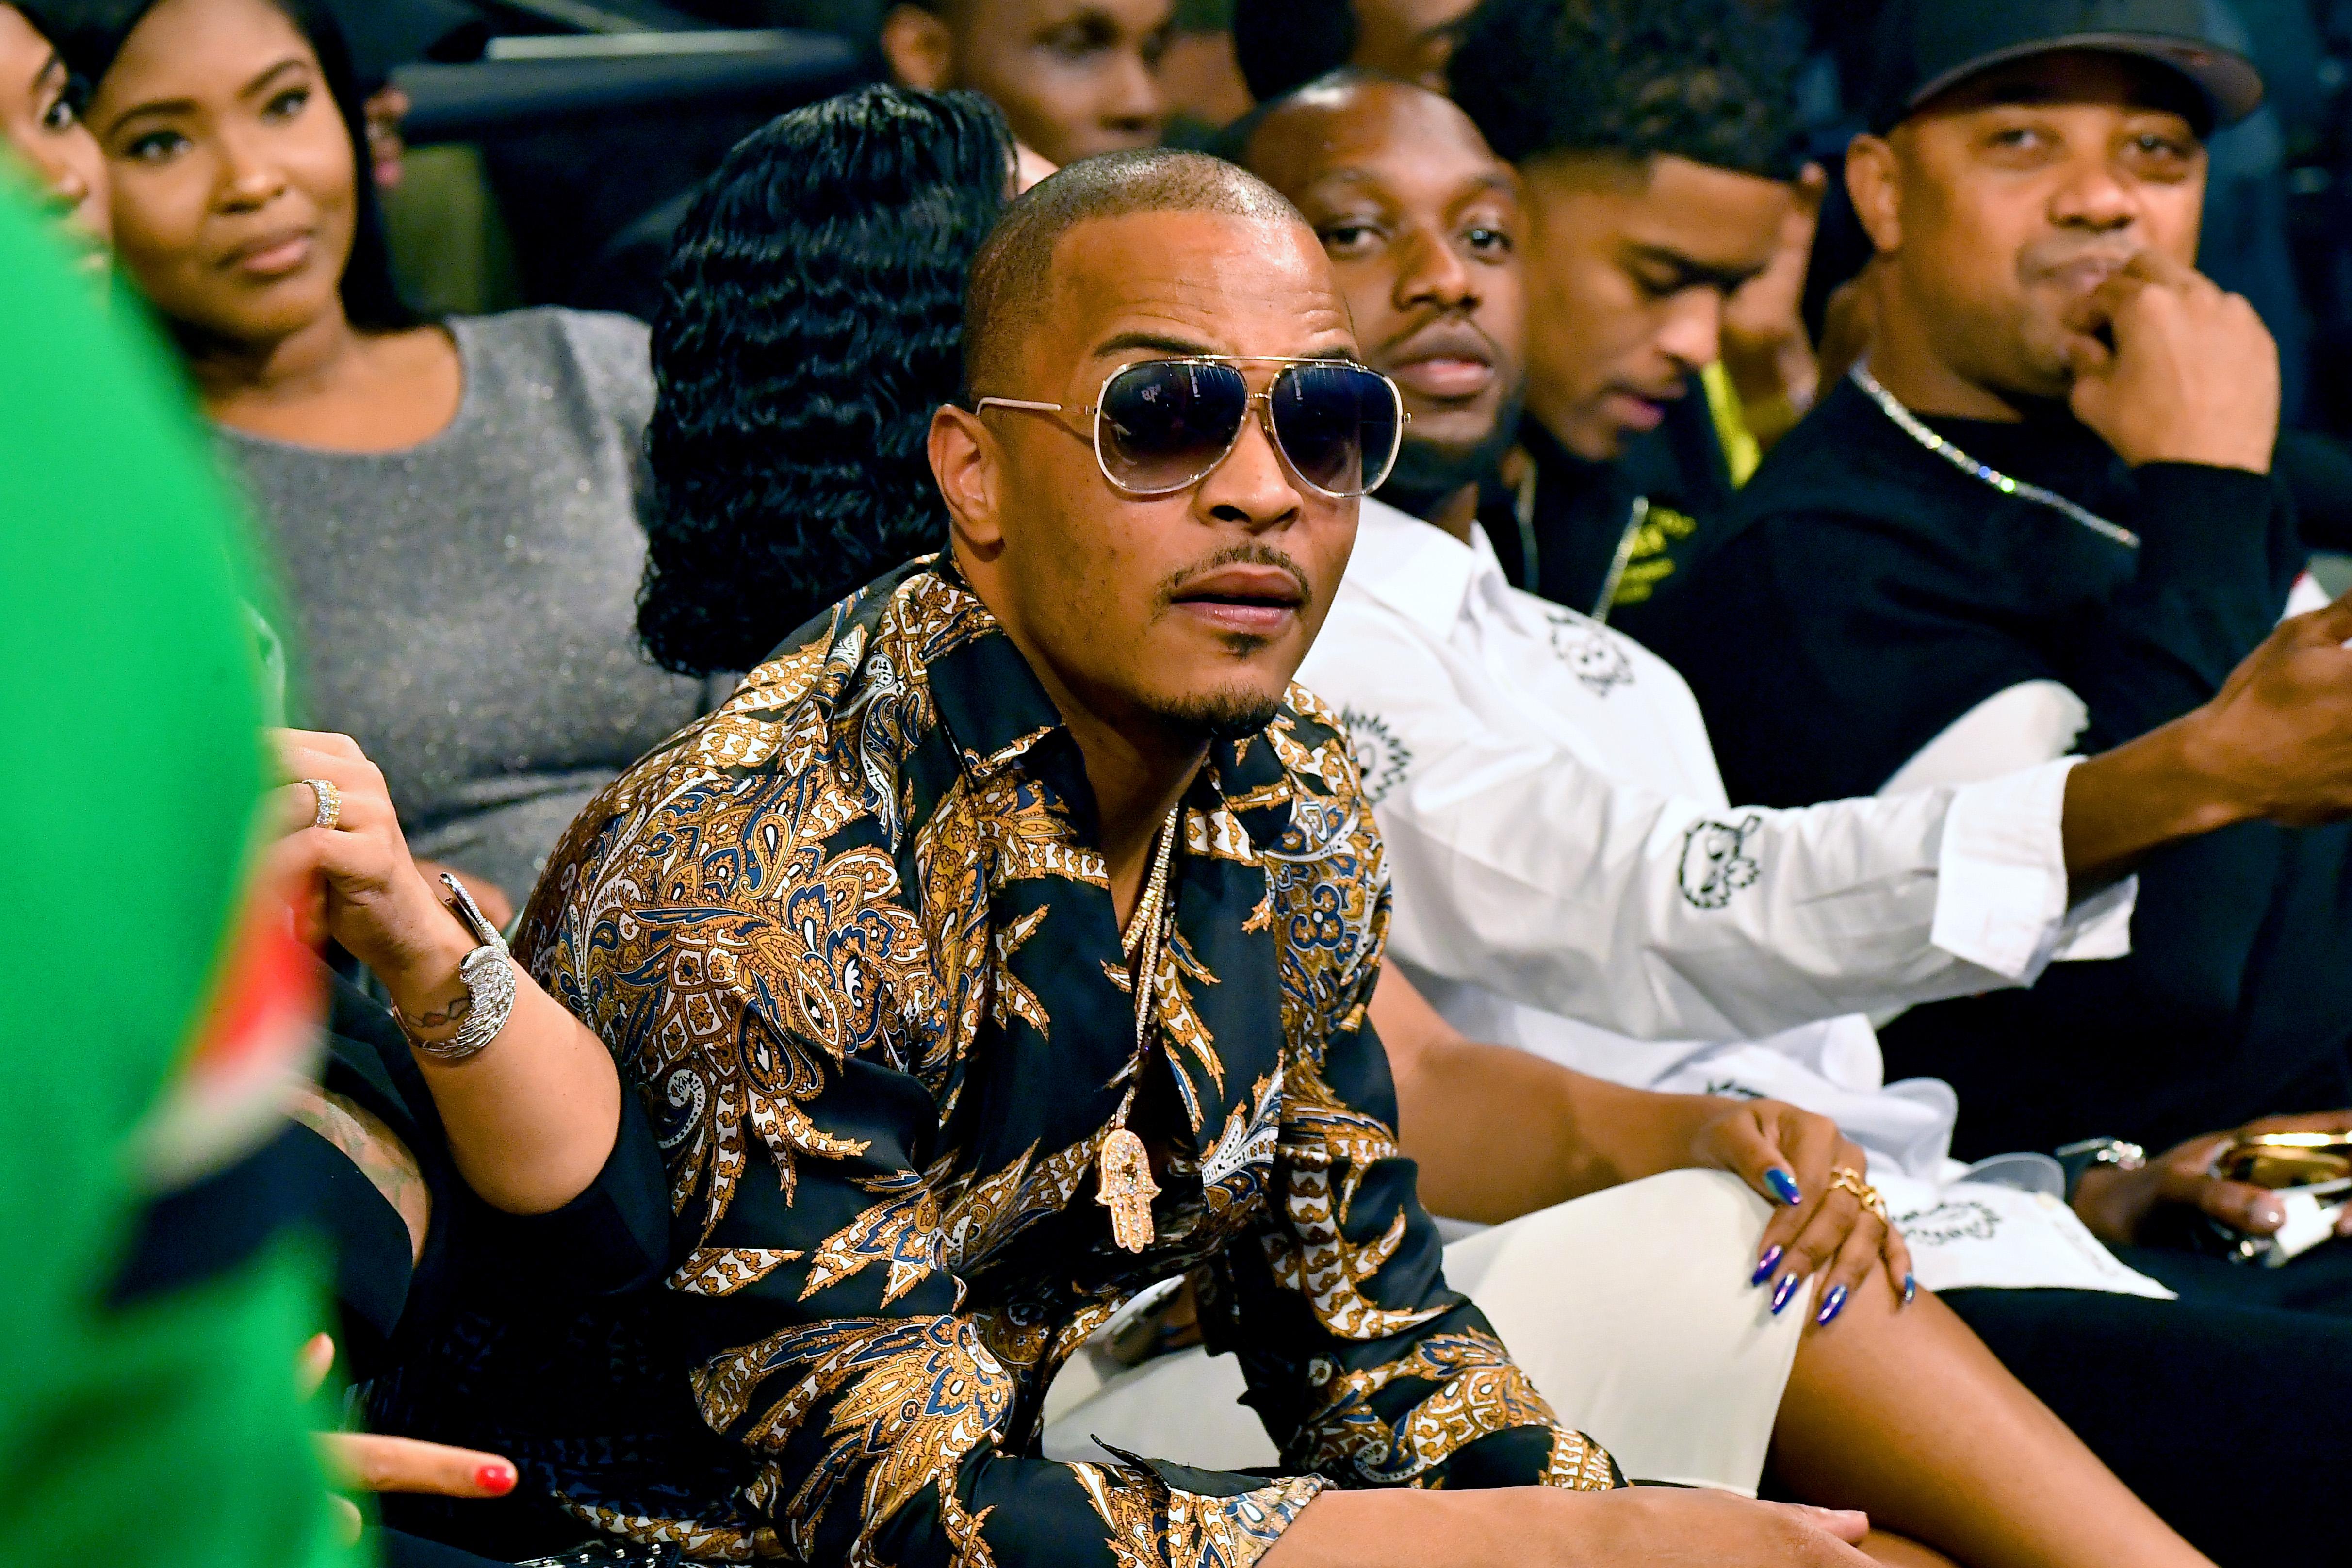 T.I.’s Interview About How He Checks His Daughter’s Hymen Has Been Scrubbed